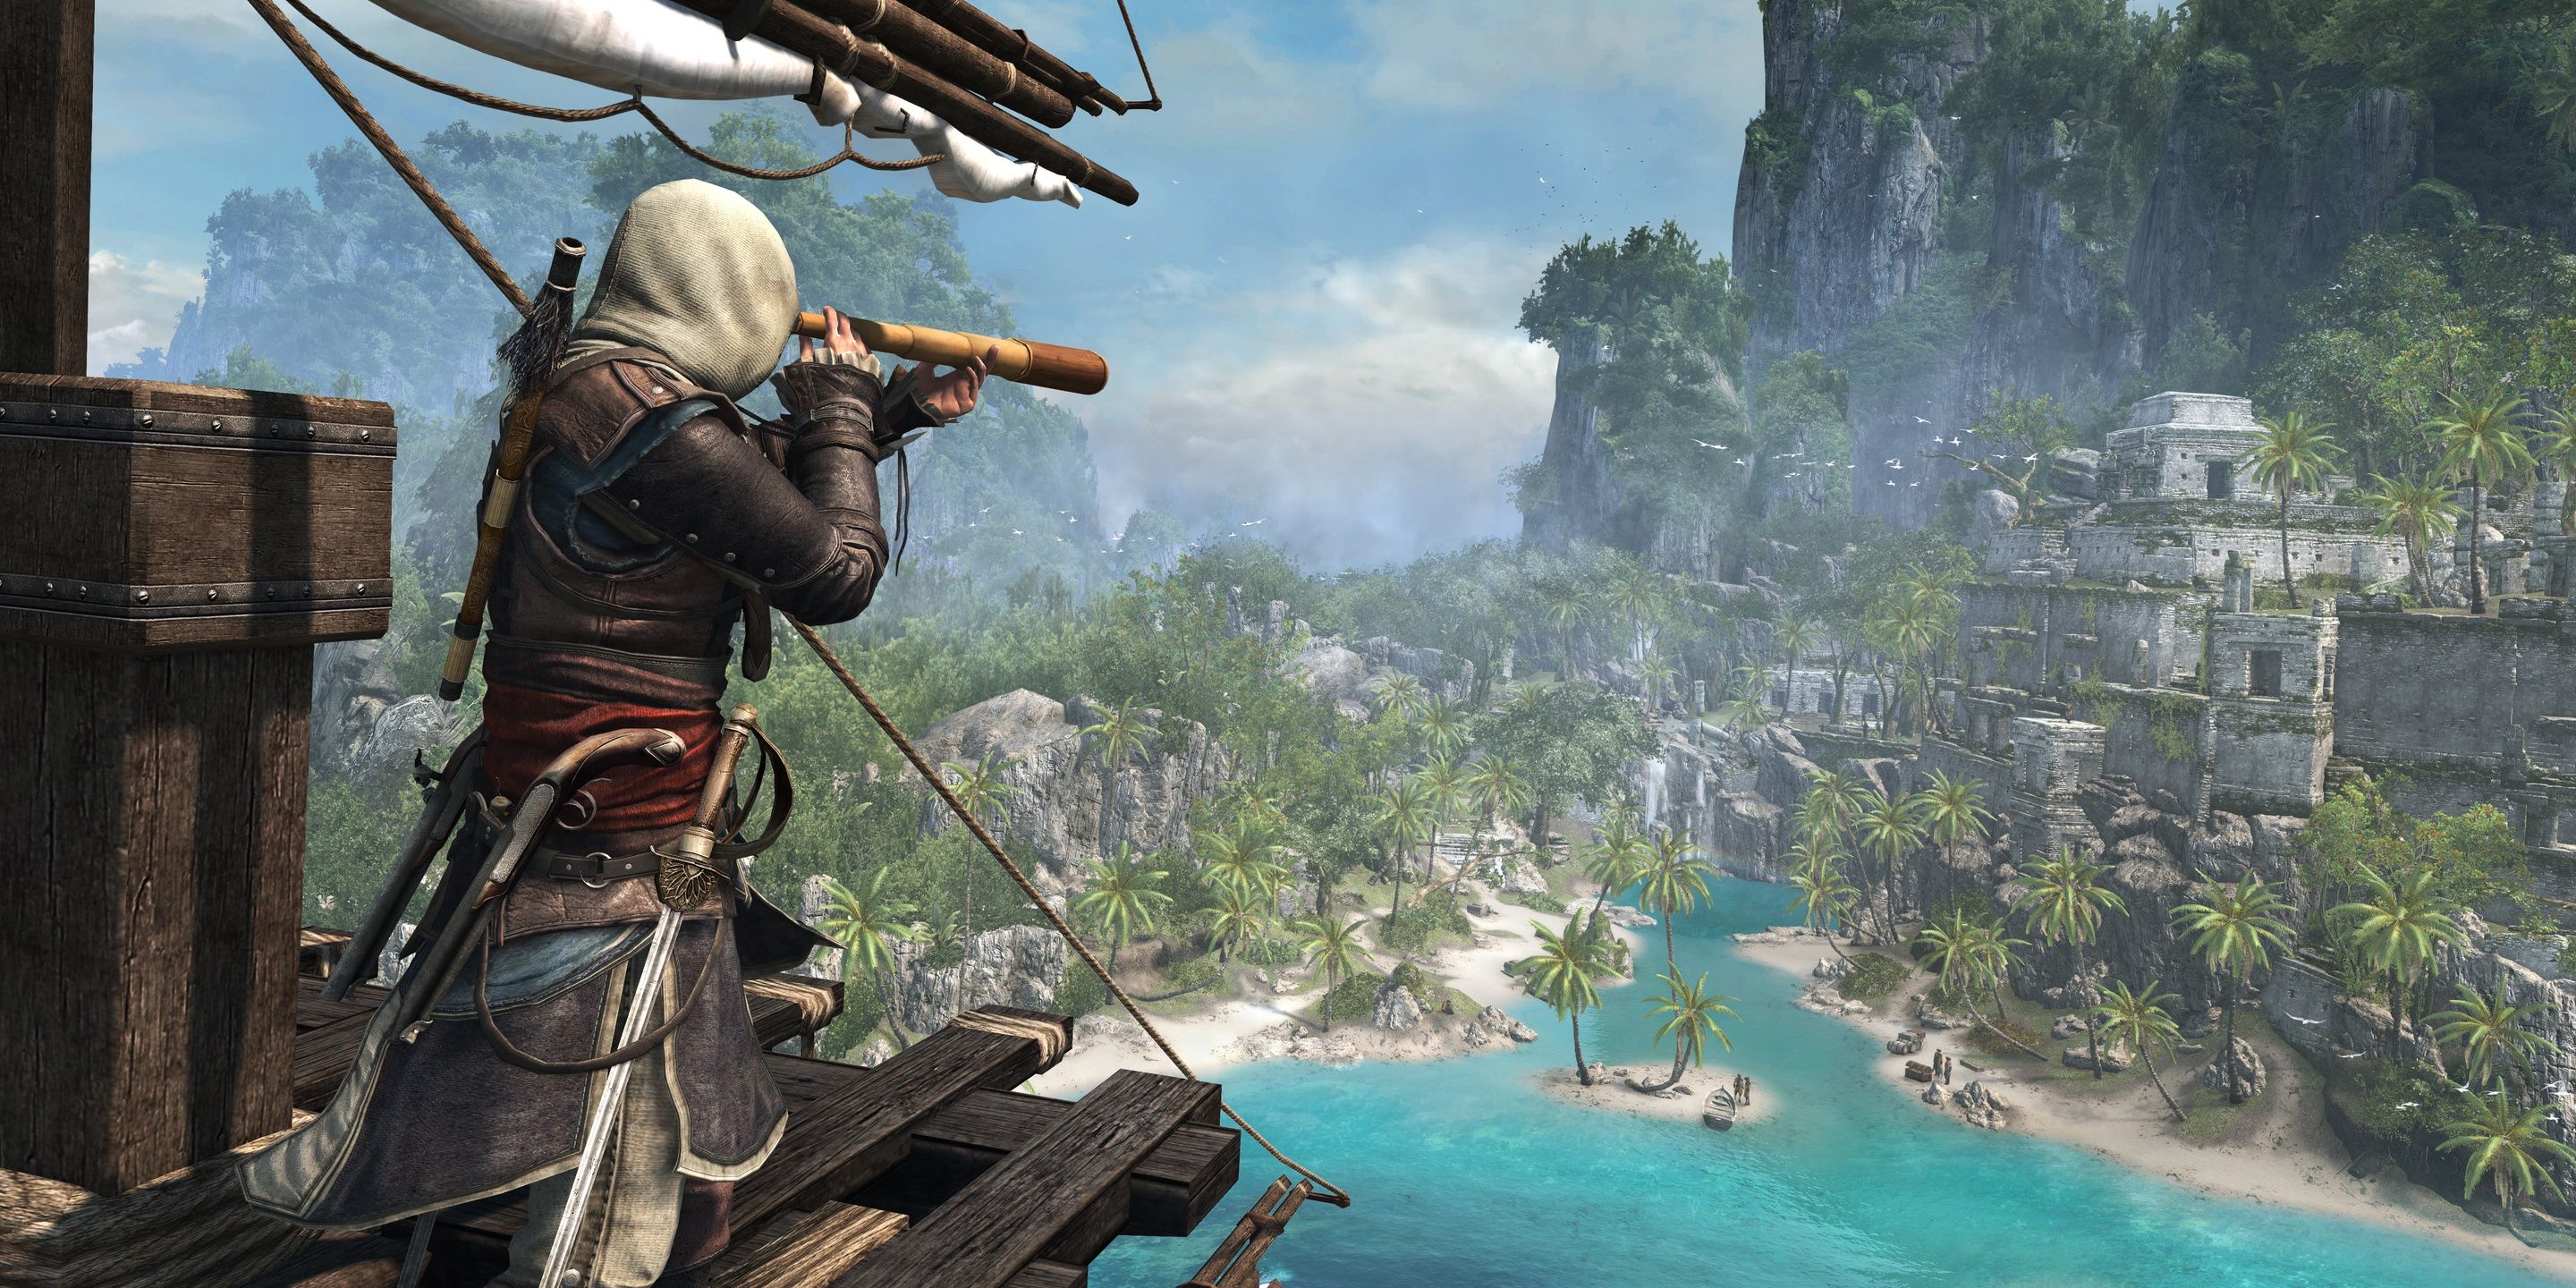 Edward Kenway looks through a mirror at an island from his ship on the high seas in Assassin's Creed IV Black Flag.